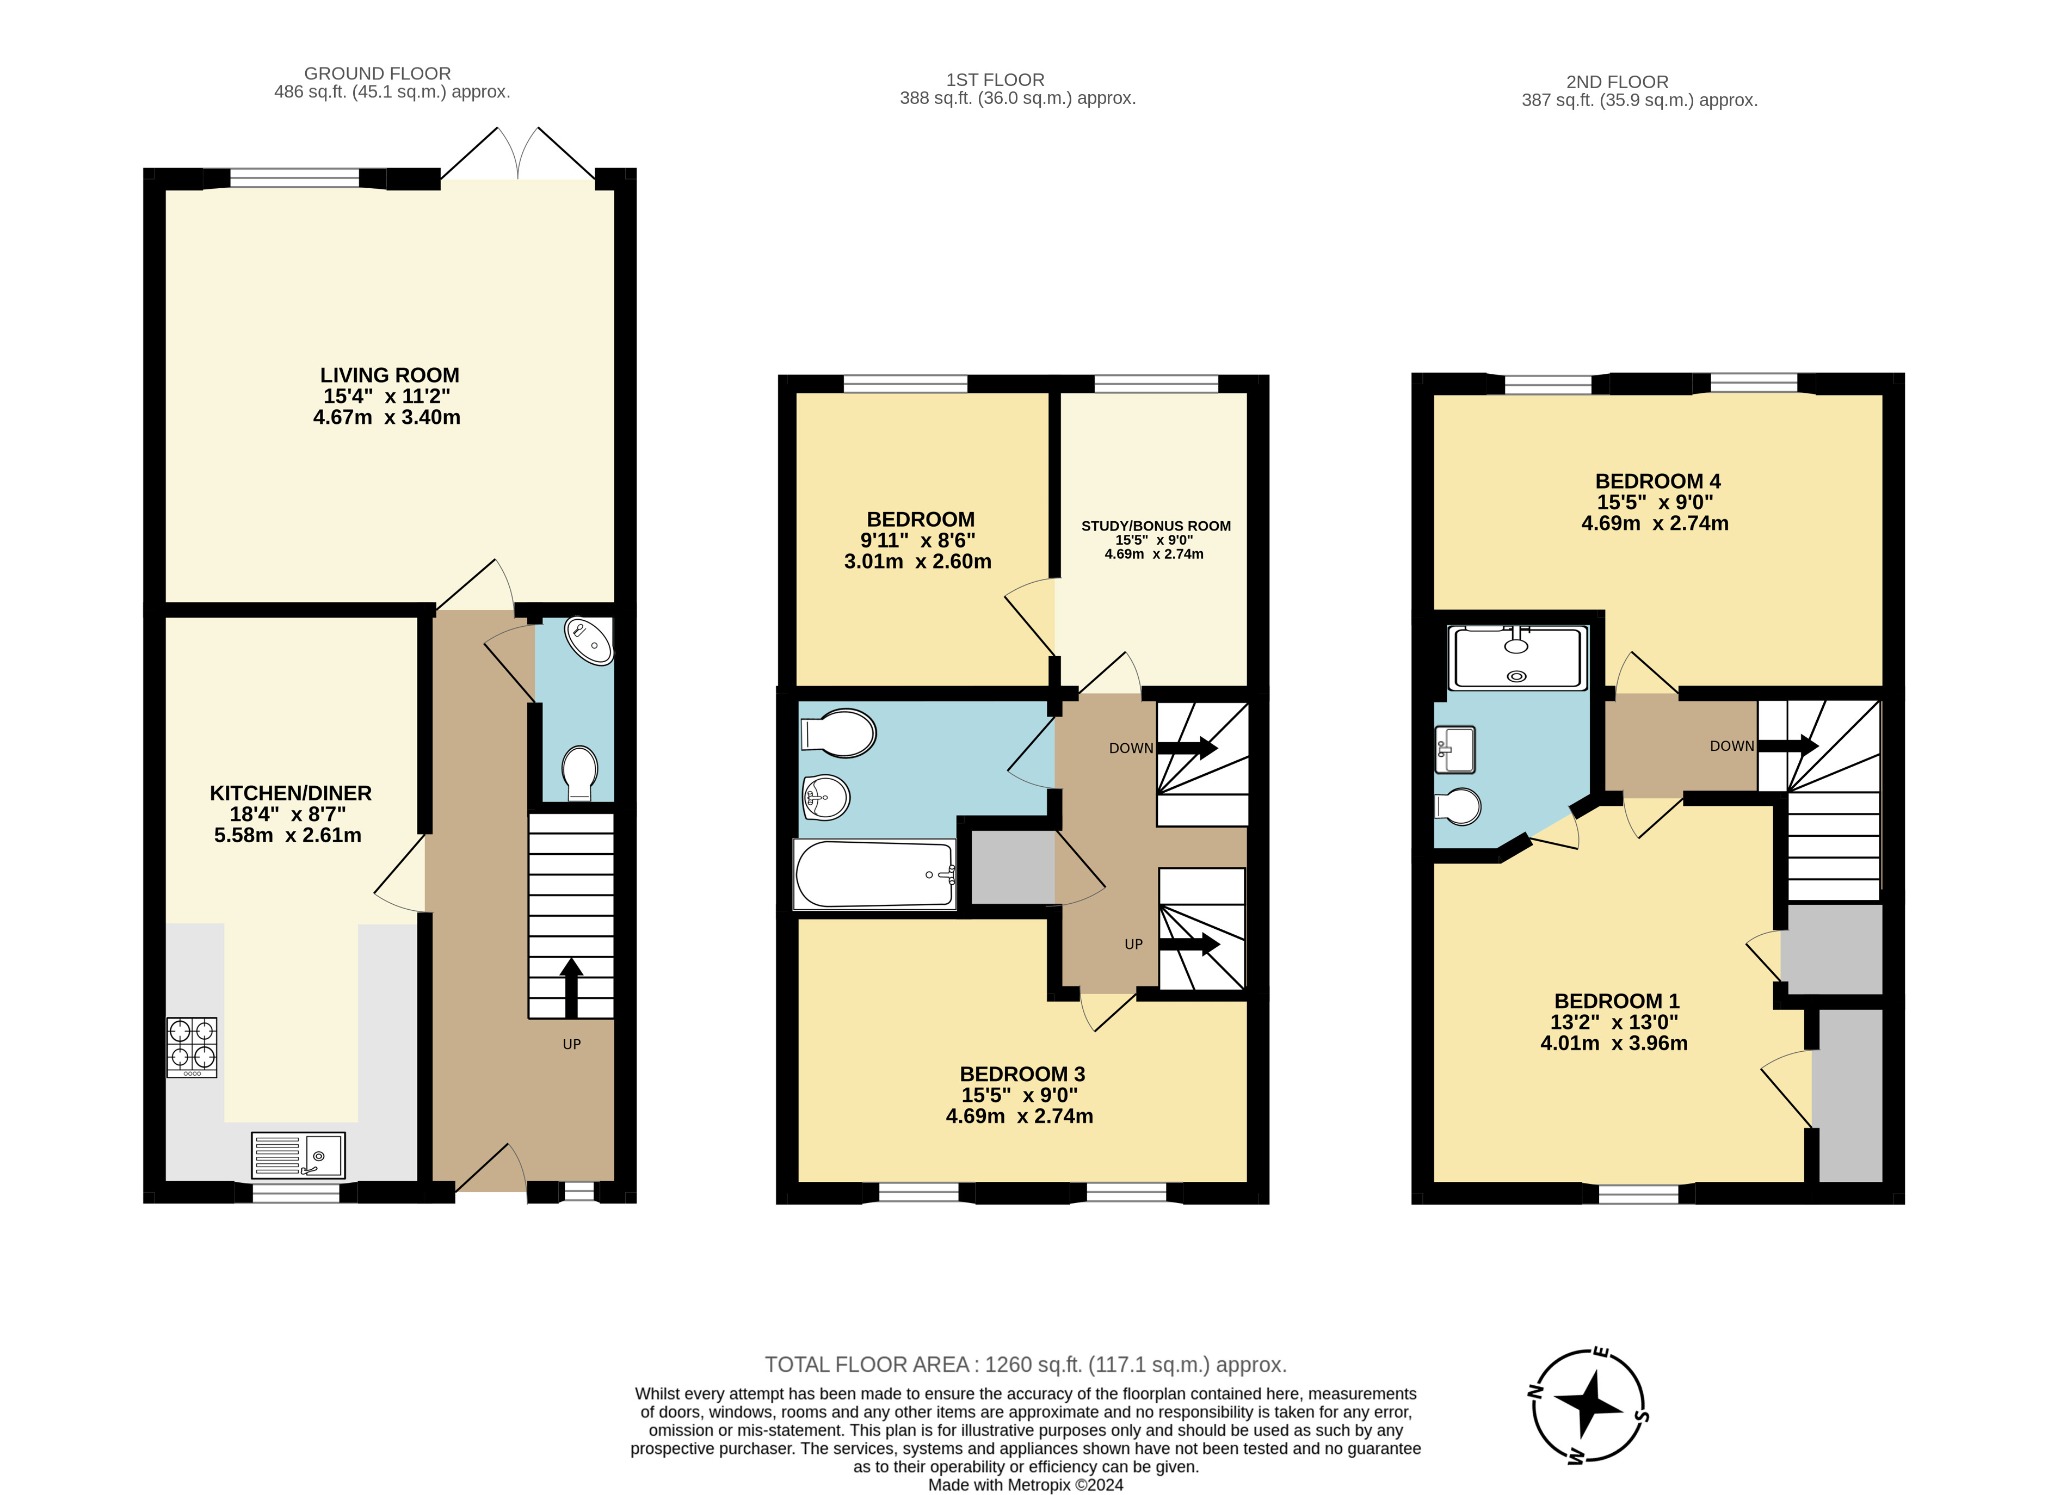 4 bed terraced house for sale in Grouse Meadows, Bracknell - Property floorplan